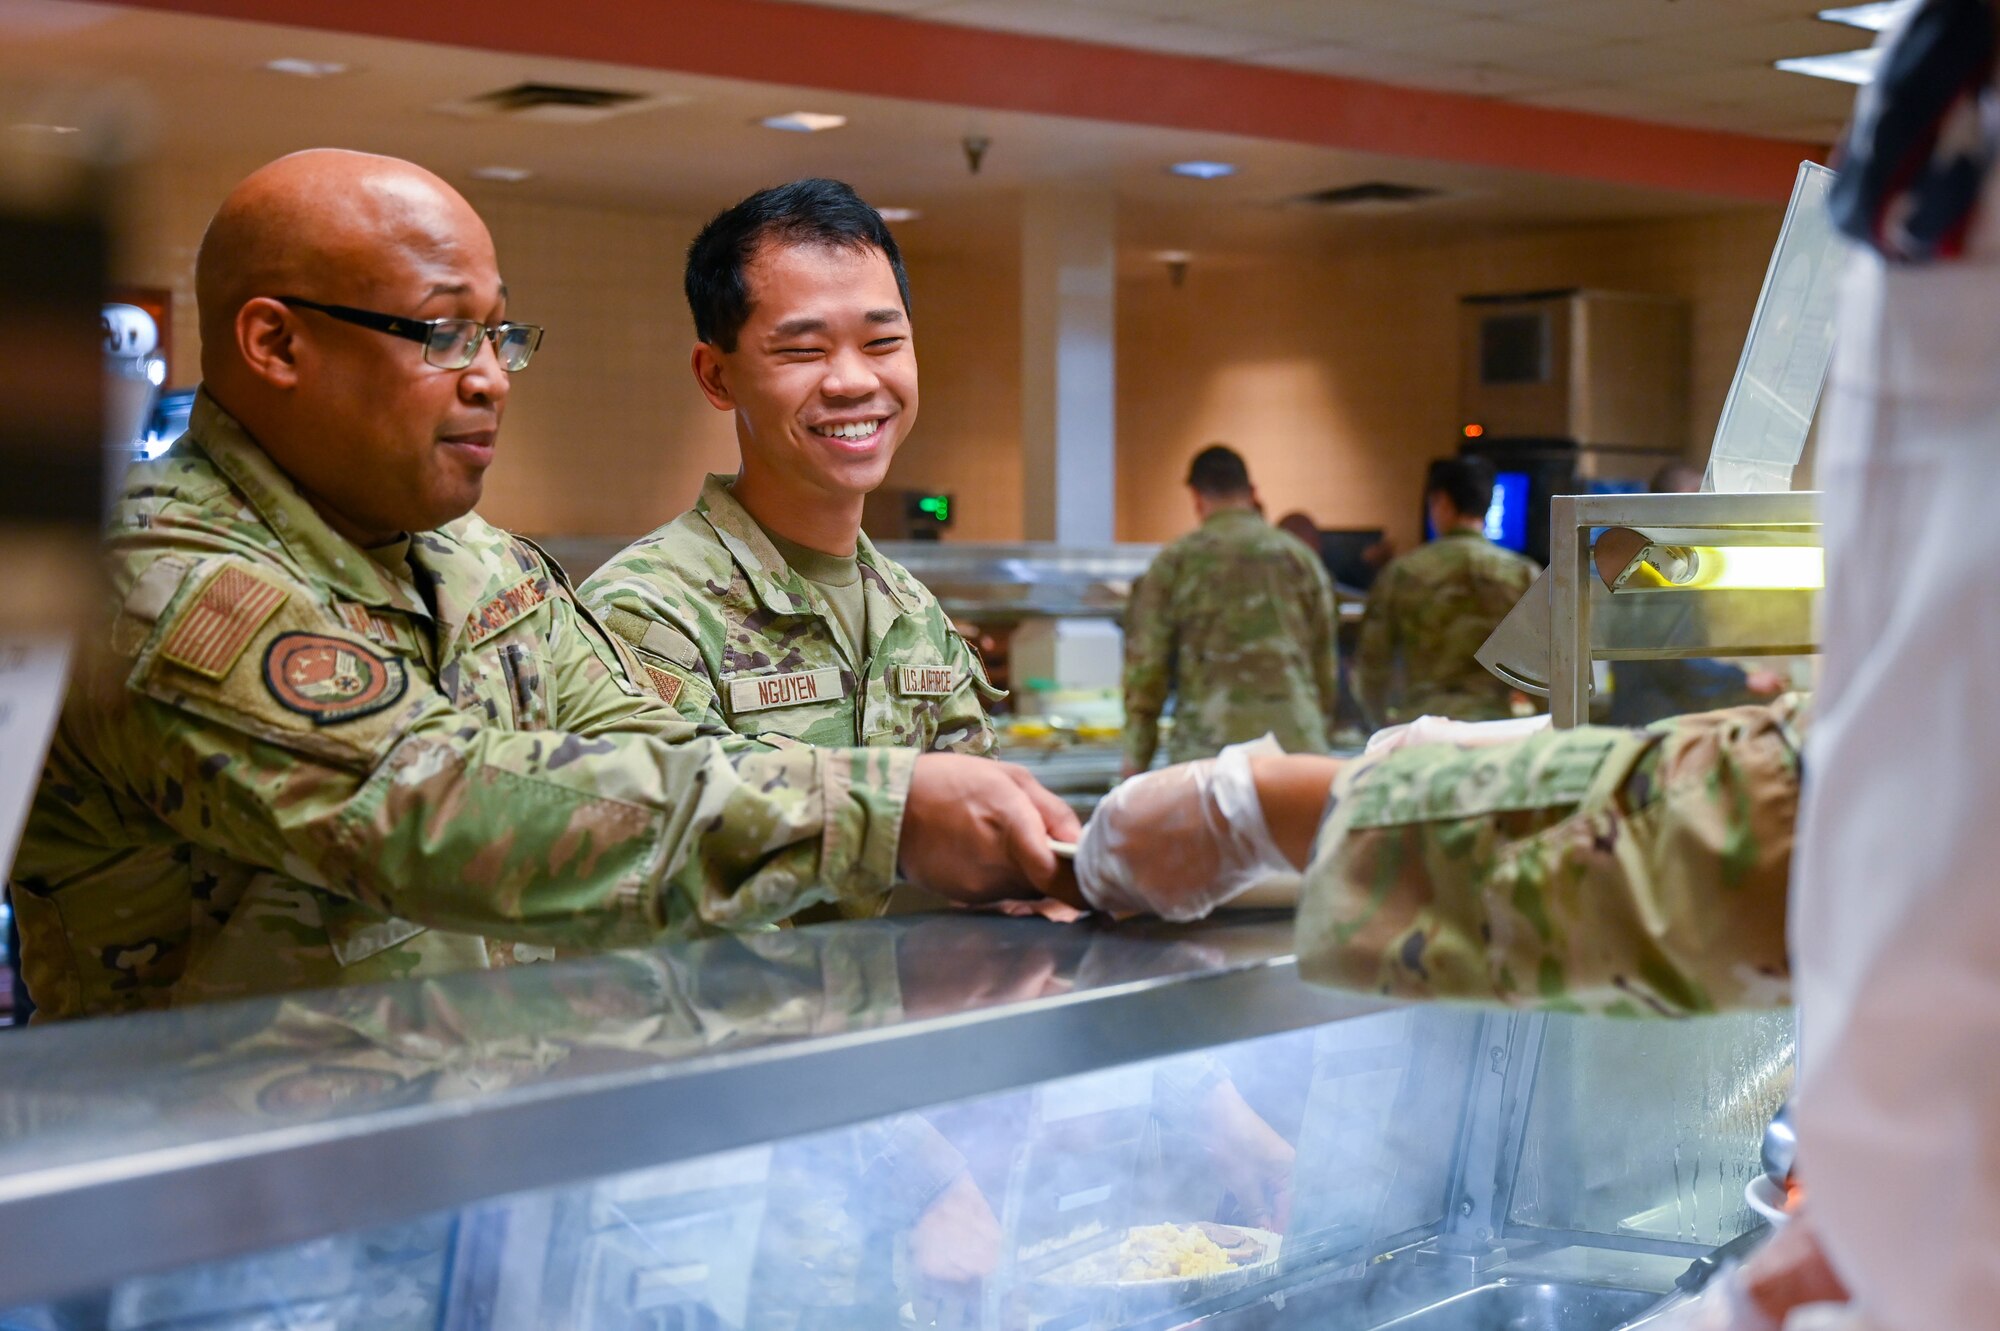 Tech Sgt. Mycha Hamilton and Senior Airman Tim Nguyen, 433rd Airlift Wing Maintenance Squadron, receive meals from a senior leader during the “Feed the Airmen” Luncheon event at Joint Base San Antonio-Lackland, Texas, Nov. 4, 2023.